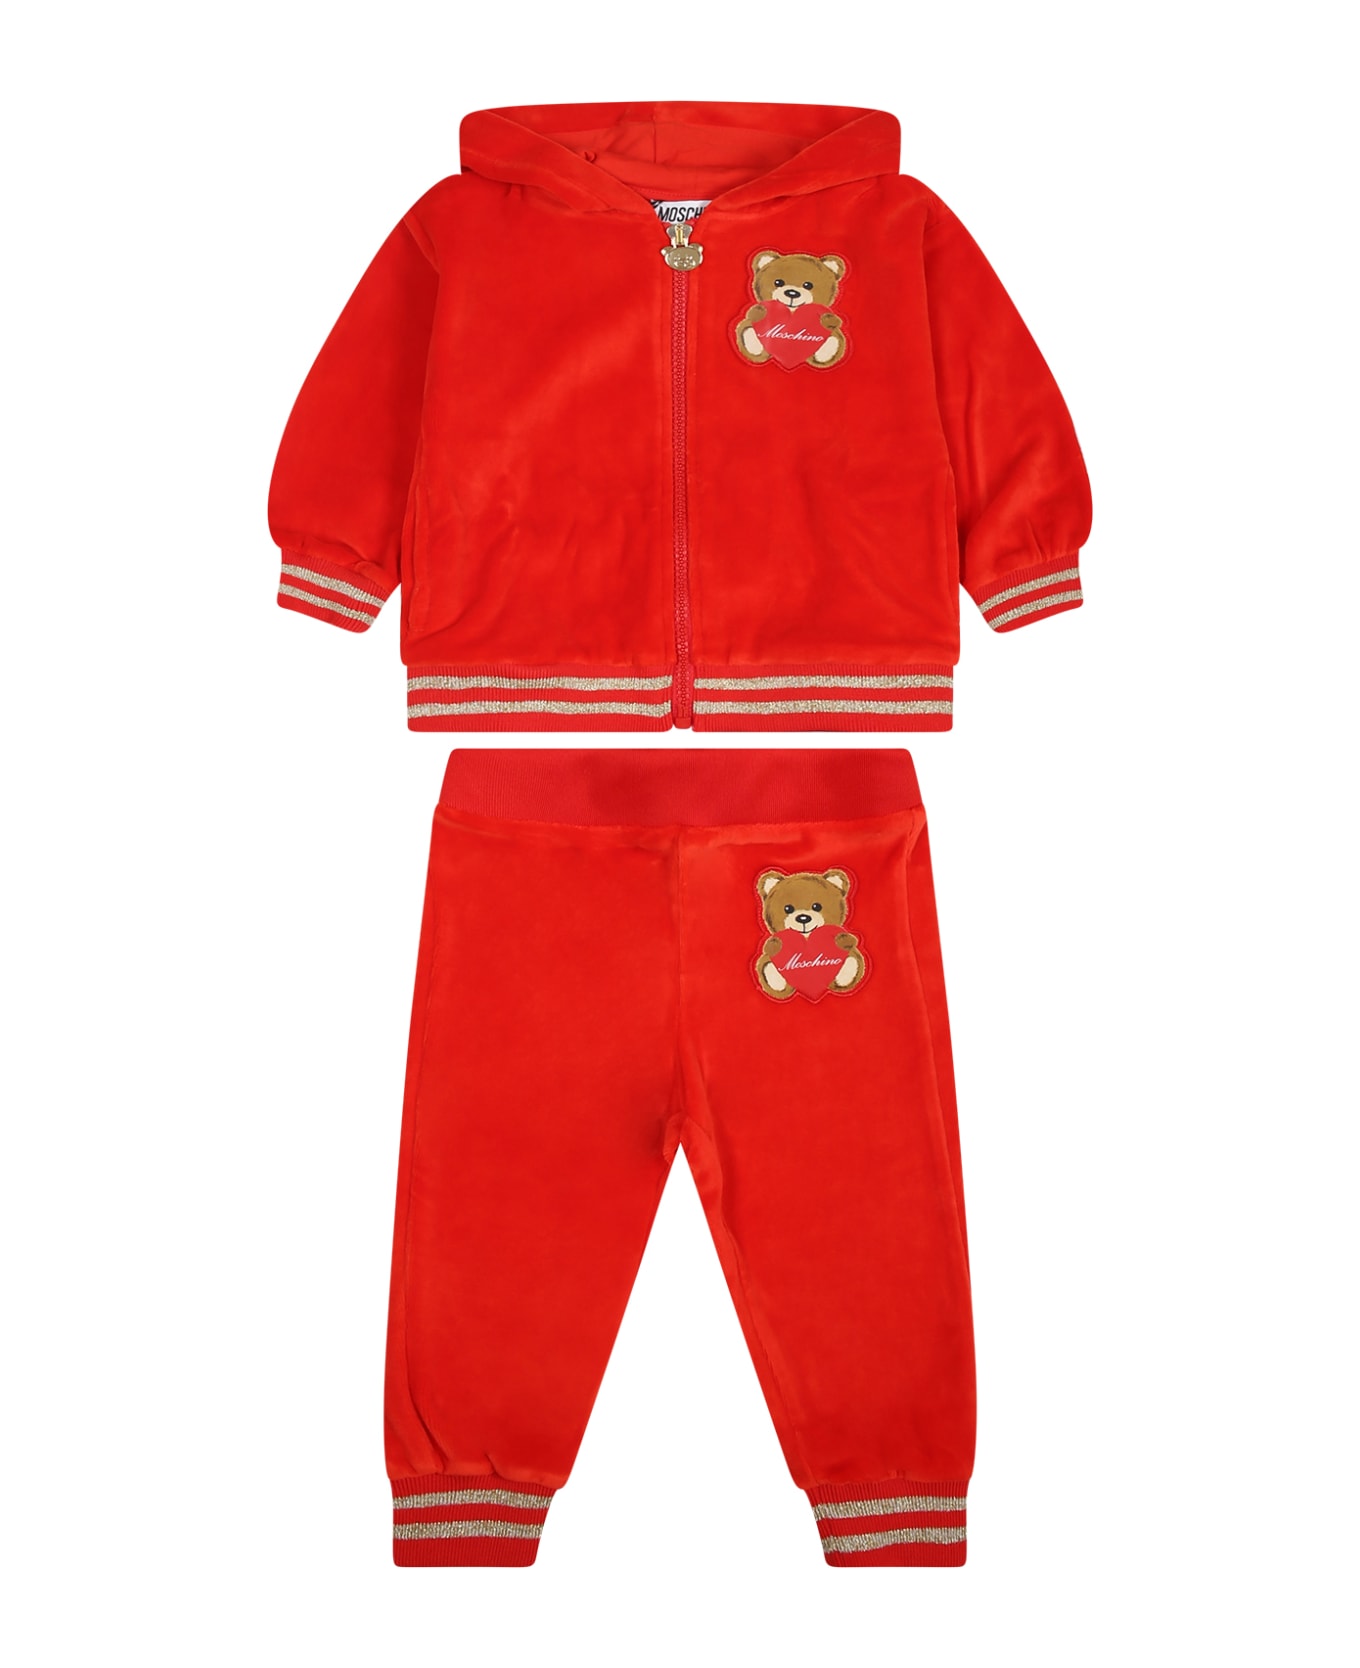 Moschino Red Suit For Baby Girl With Teddy Bear - Red